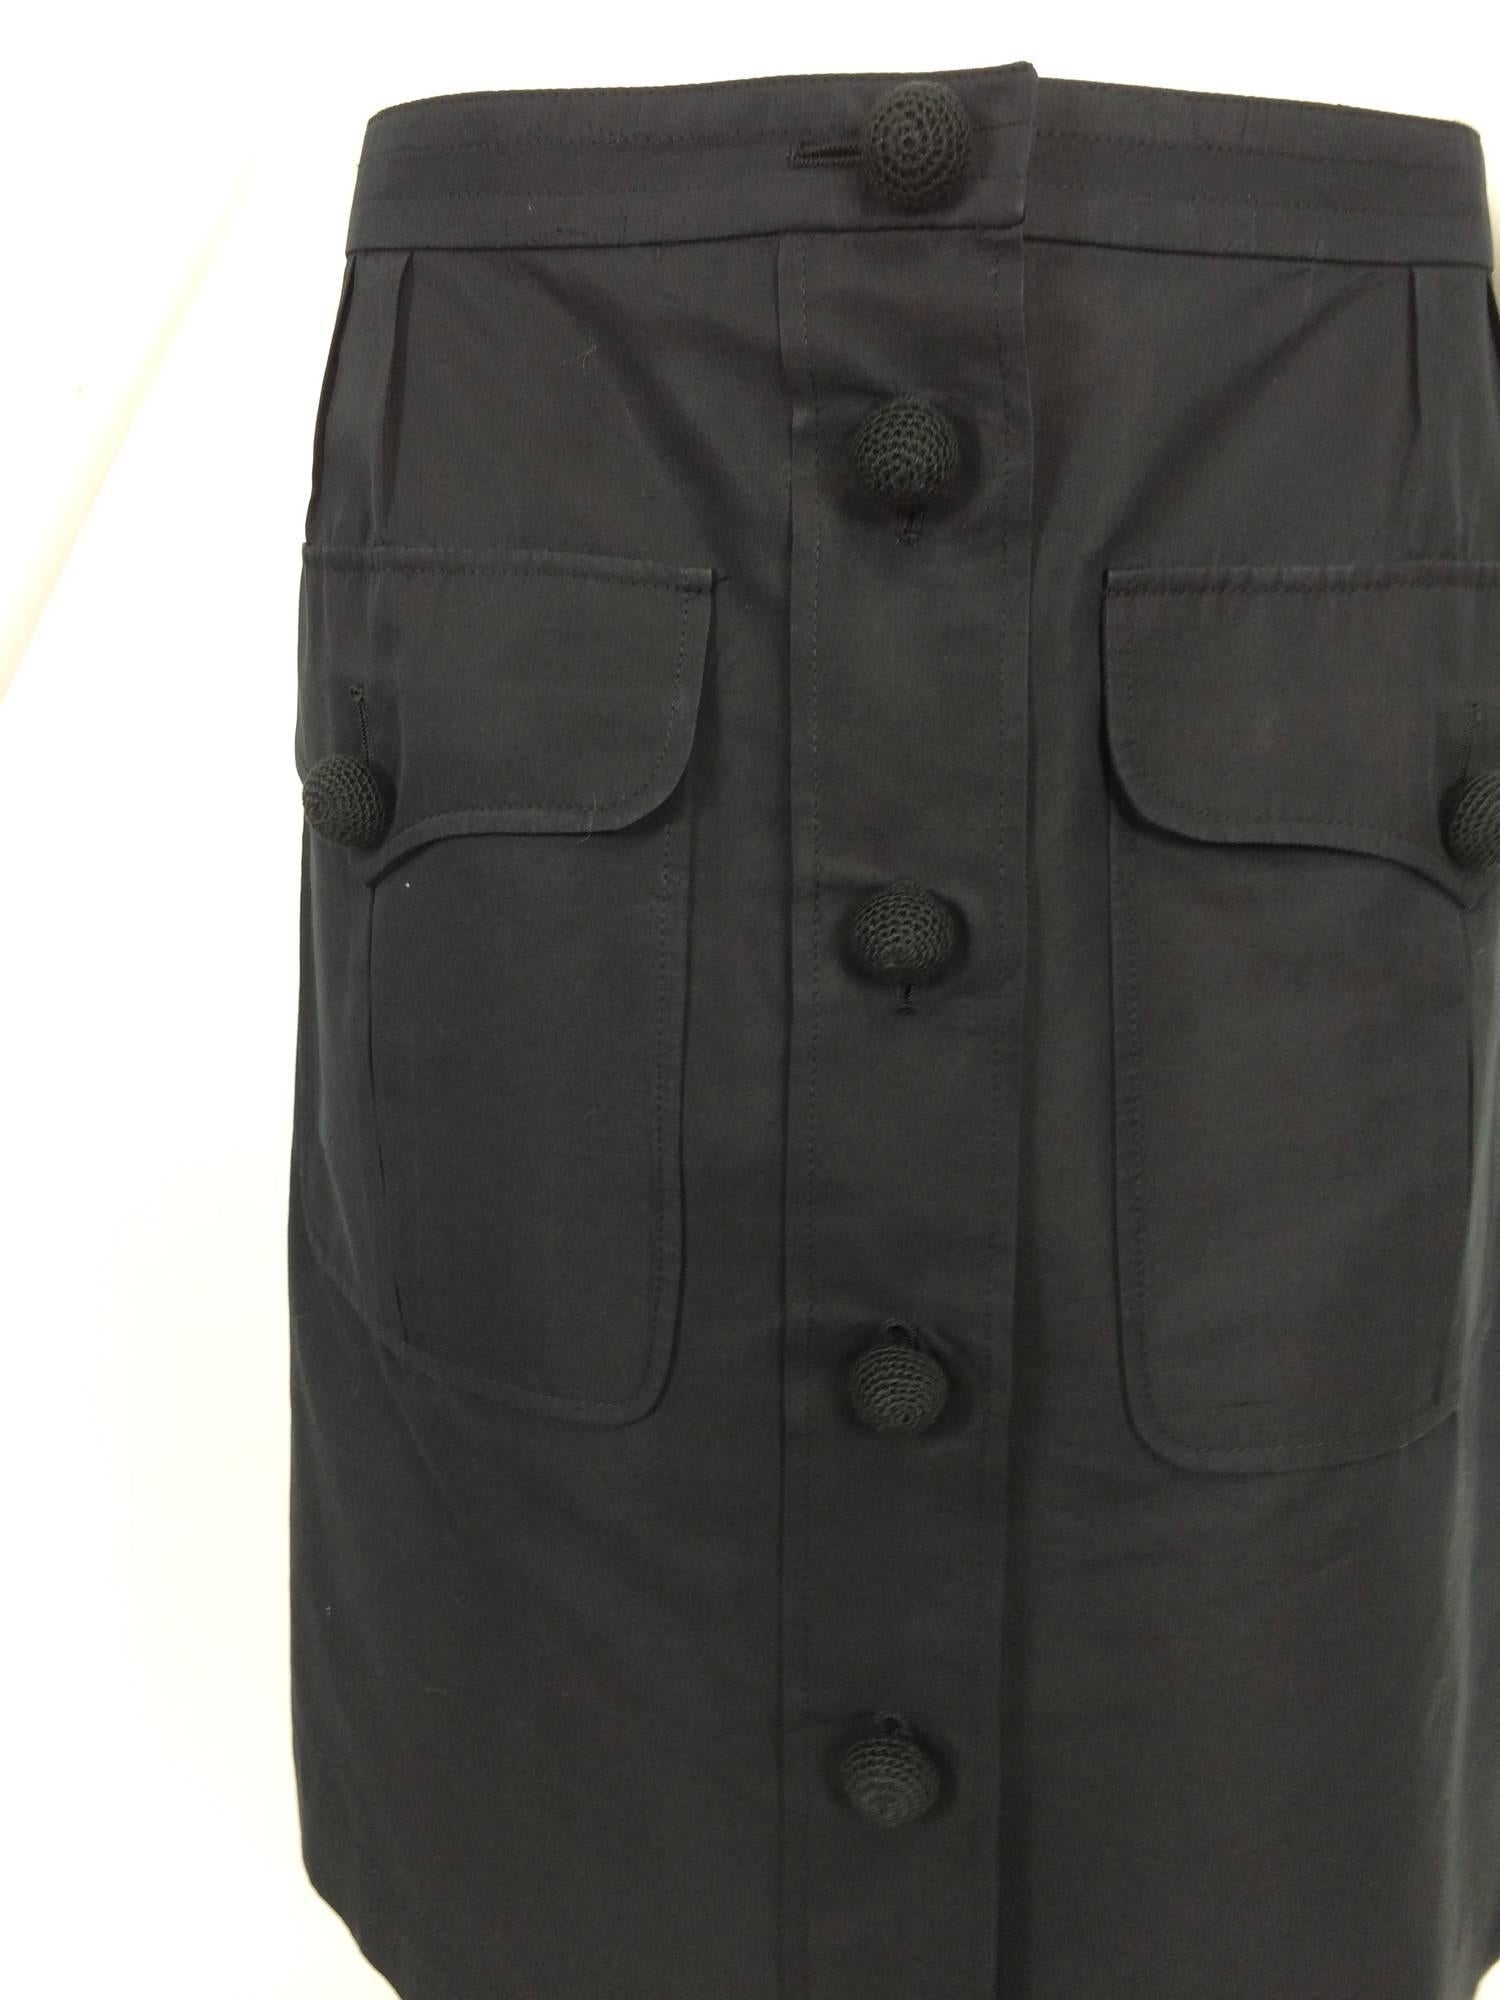 Yves St Laurent black cotton & silk flap pocket skirt with crochet buttons...banded waist skirt closes at the front with domed crochet buttons, there are two large hip front pockets that have flap/button closures...The skirt is unlined...Marked size